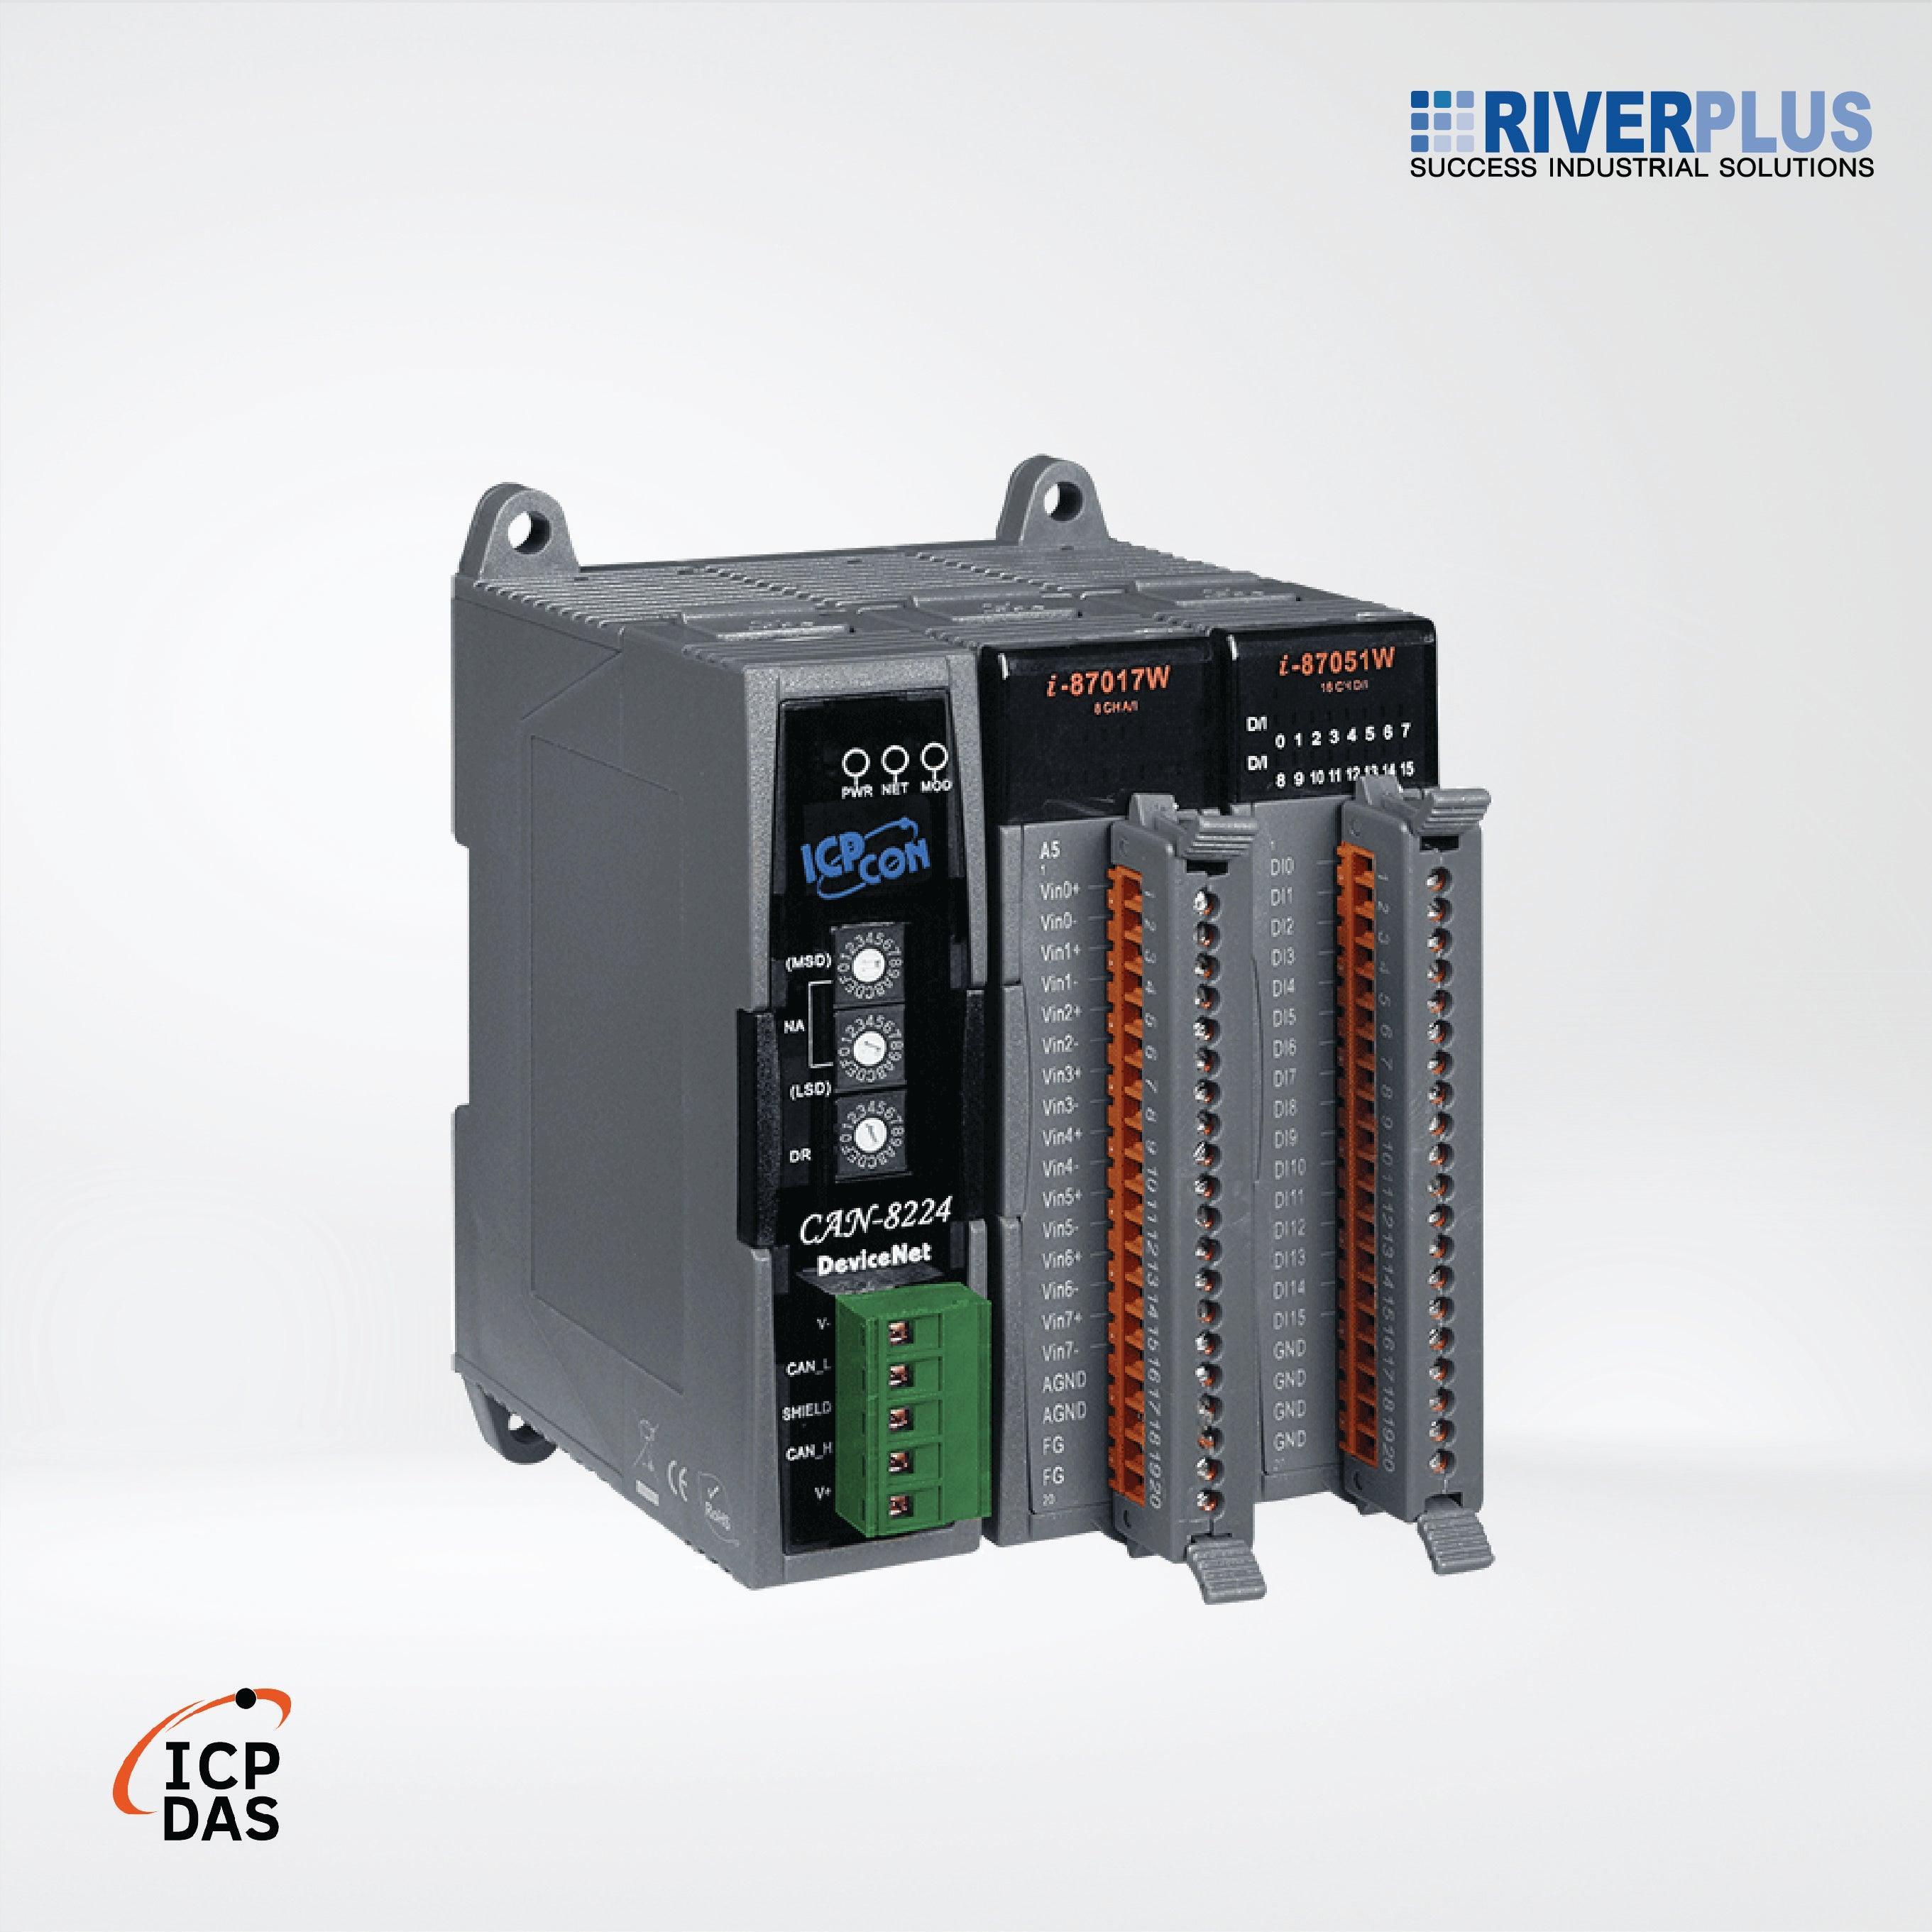 CAN-8224-G DeviceNet Remote I/O Unit with 2 I/O Slots - Riverplus